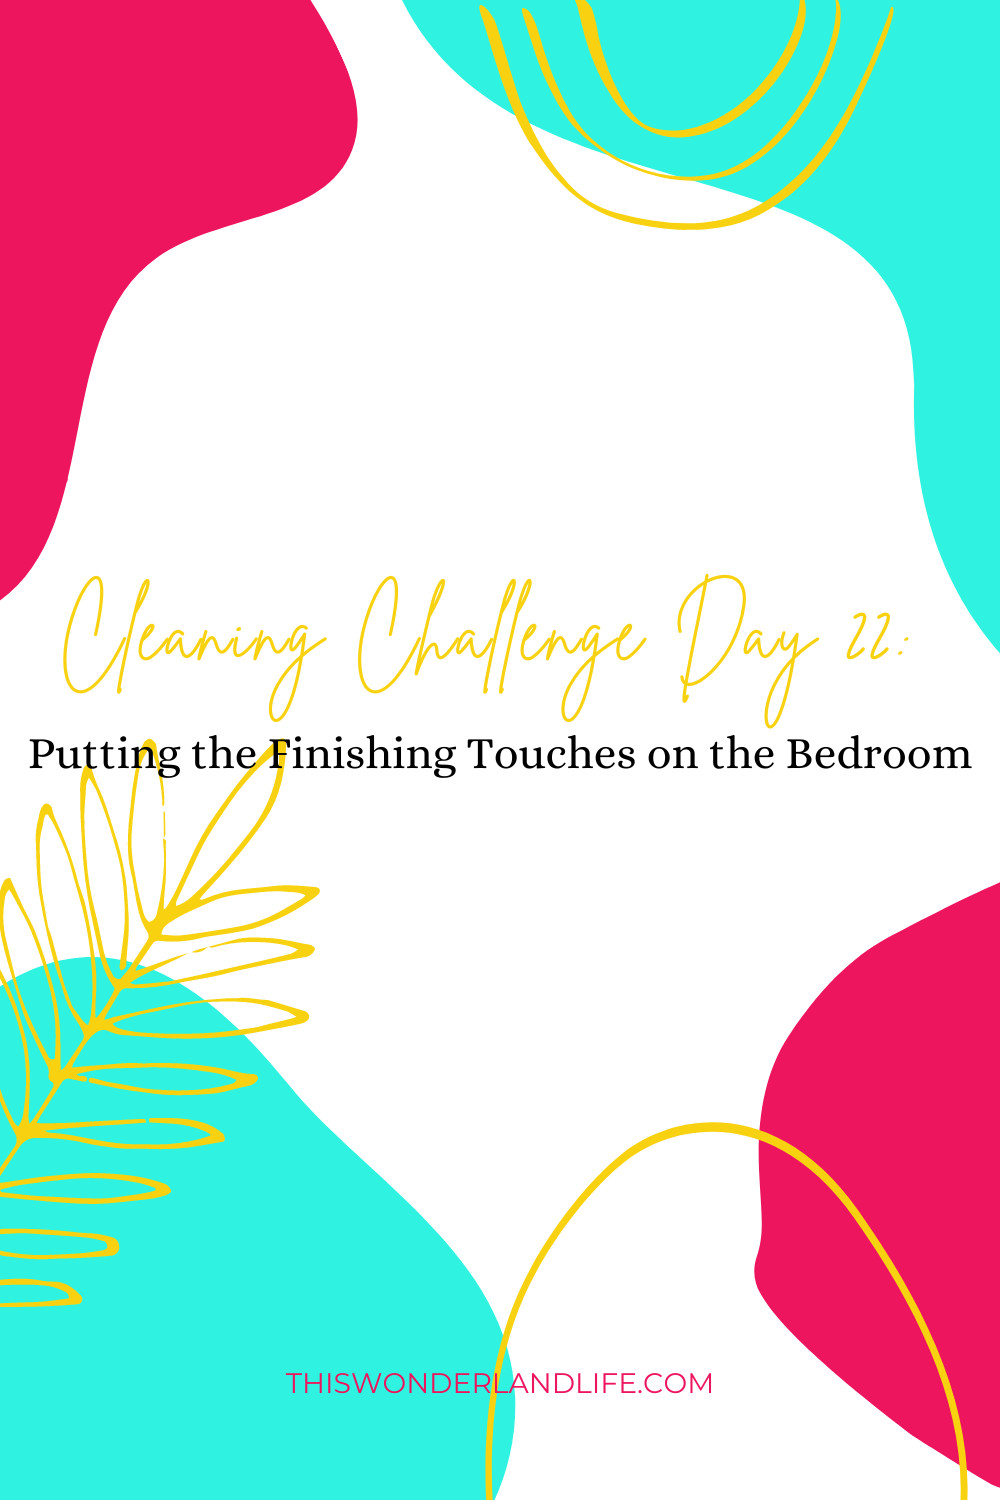 Cleaning Challenge Day 21: Putting the Finishing Touches on the Bedroom